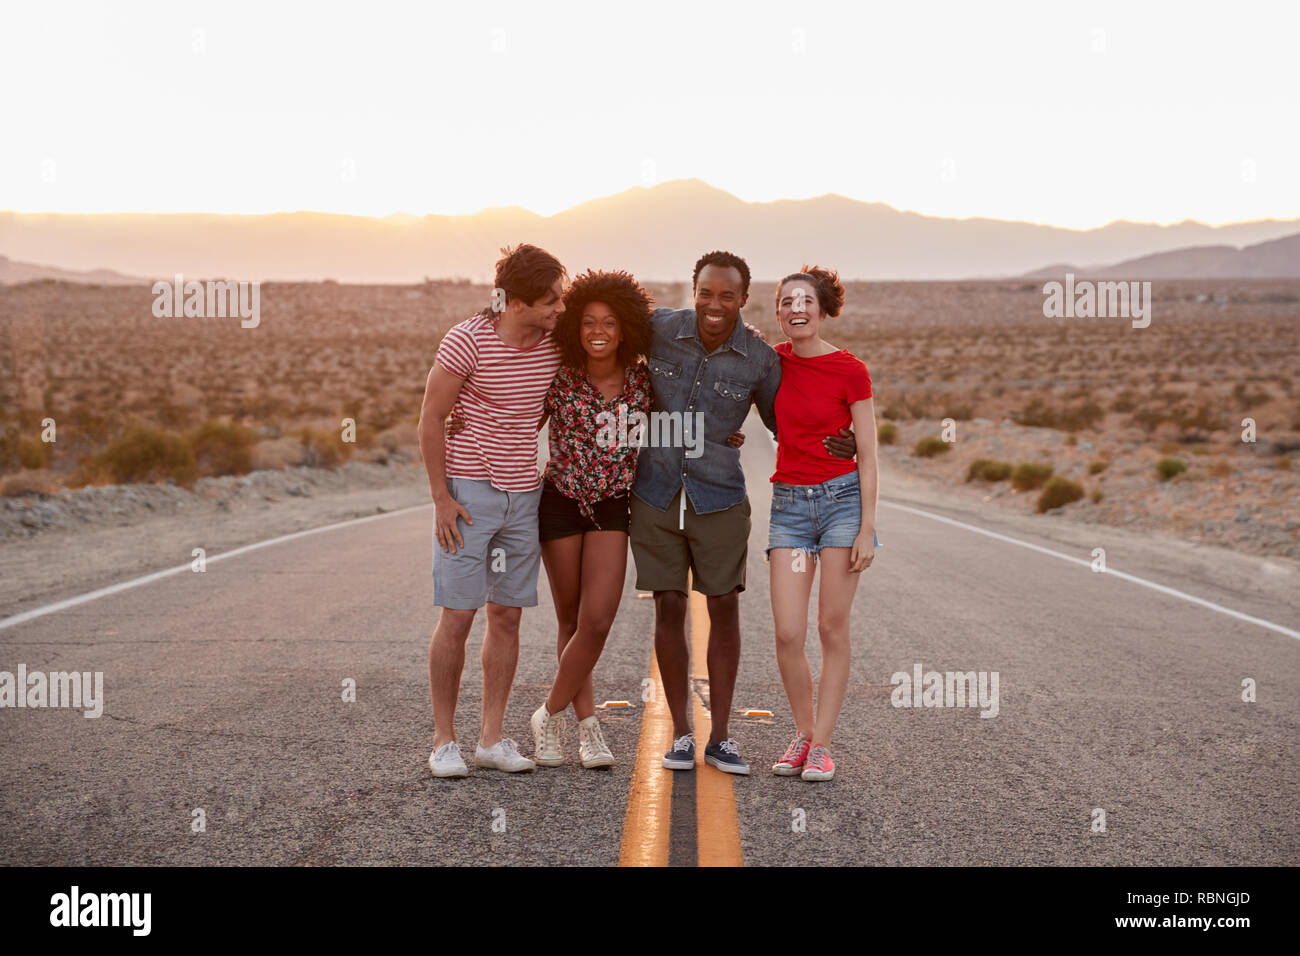 Four friends standing on a desert highway looking to camera Stock Photo